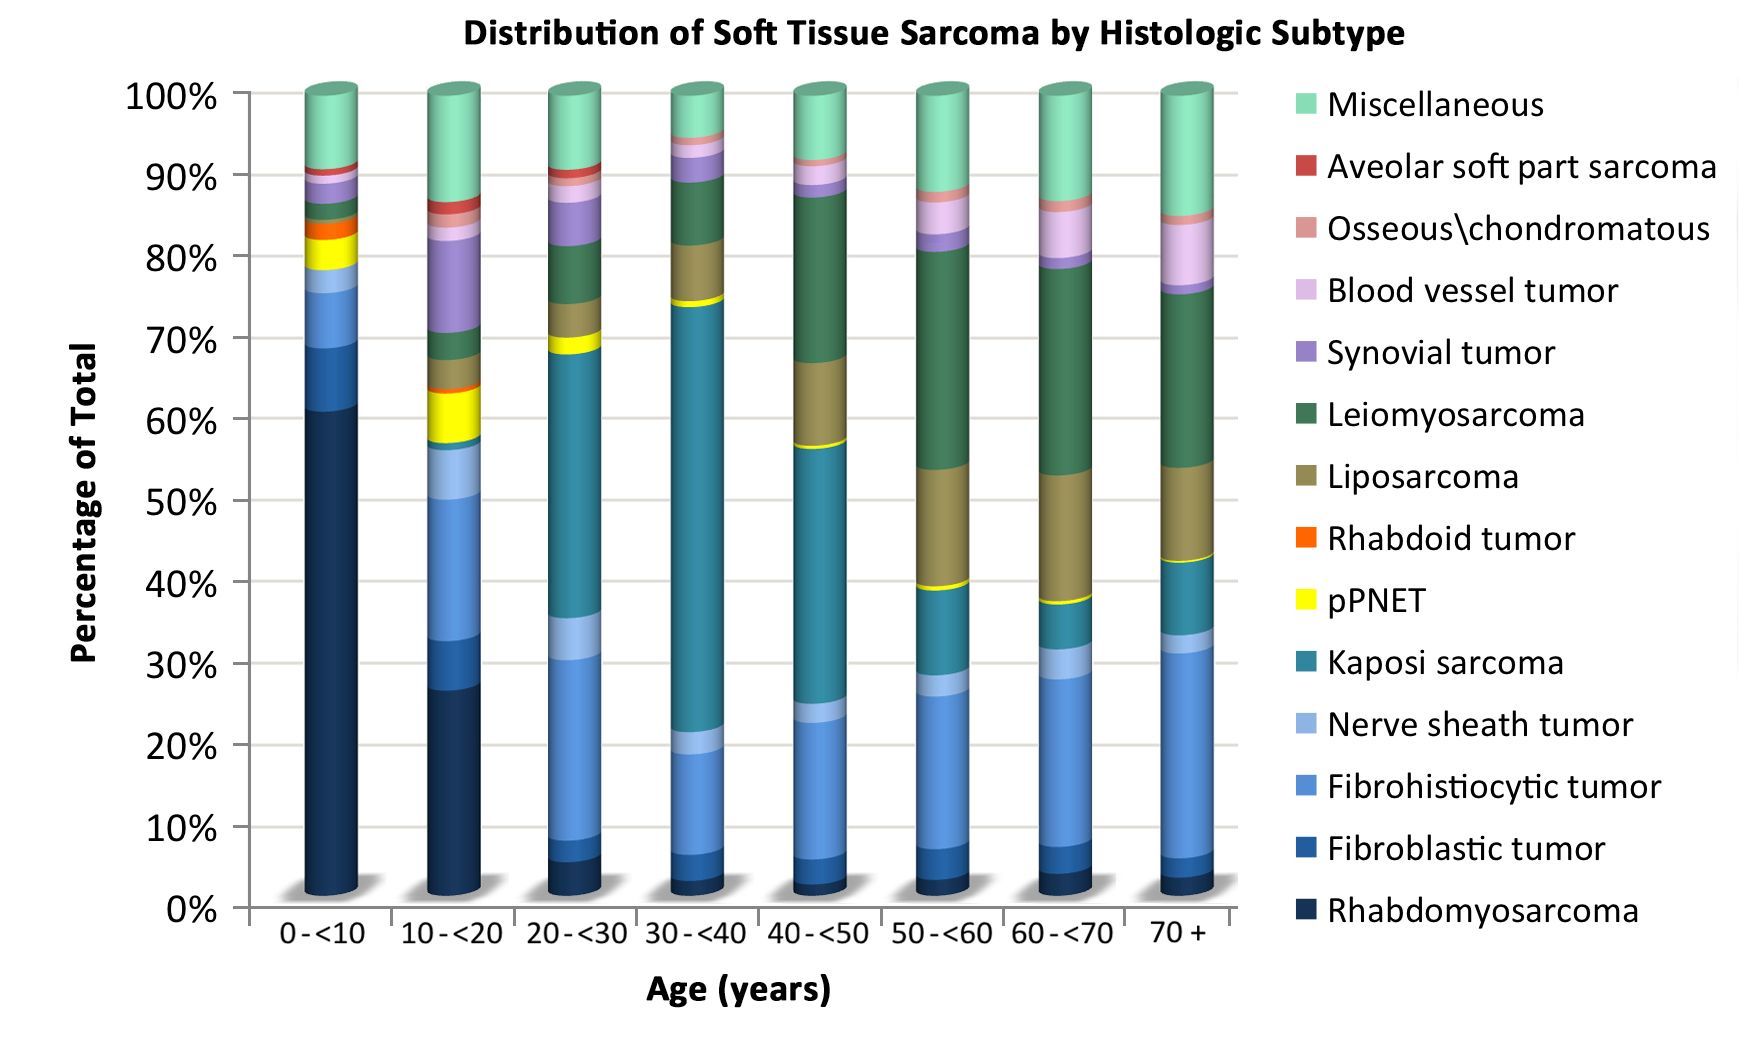 Chart showing the distribution of nonrhabdomyosarcomatous soft tissue sarcomas by age according to histologic subtype.